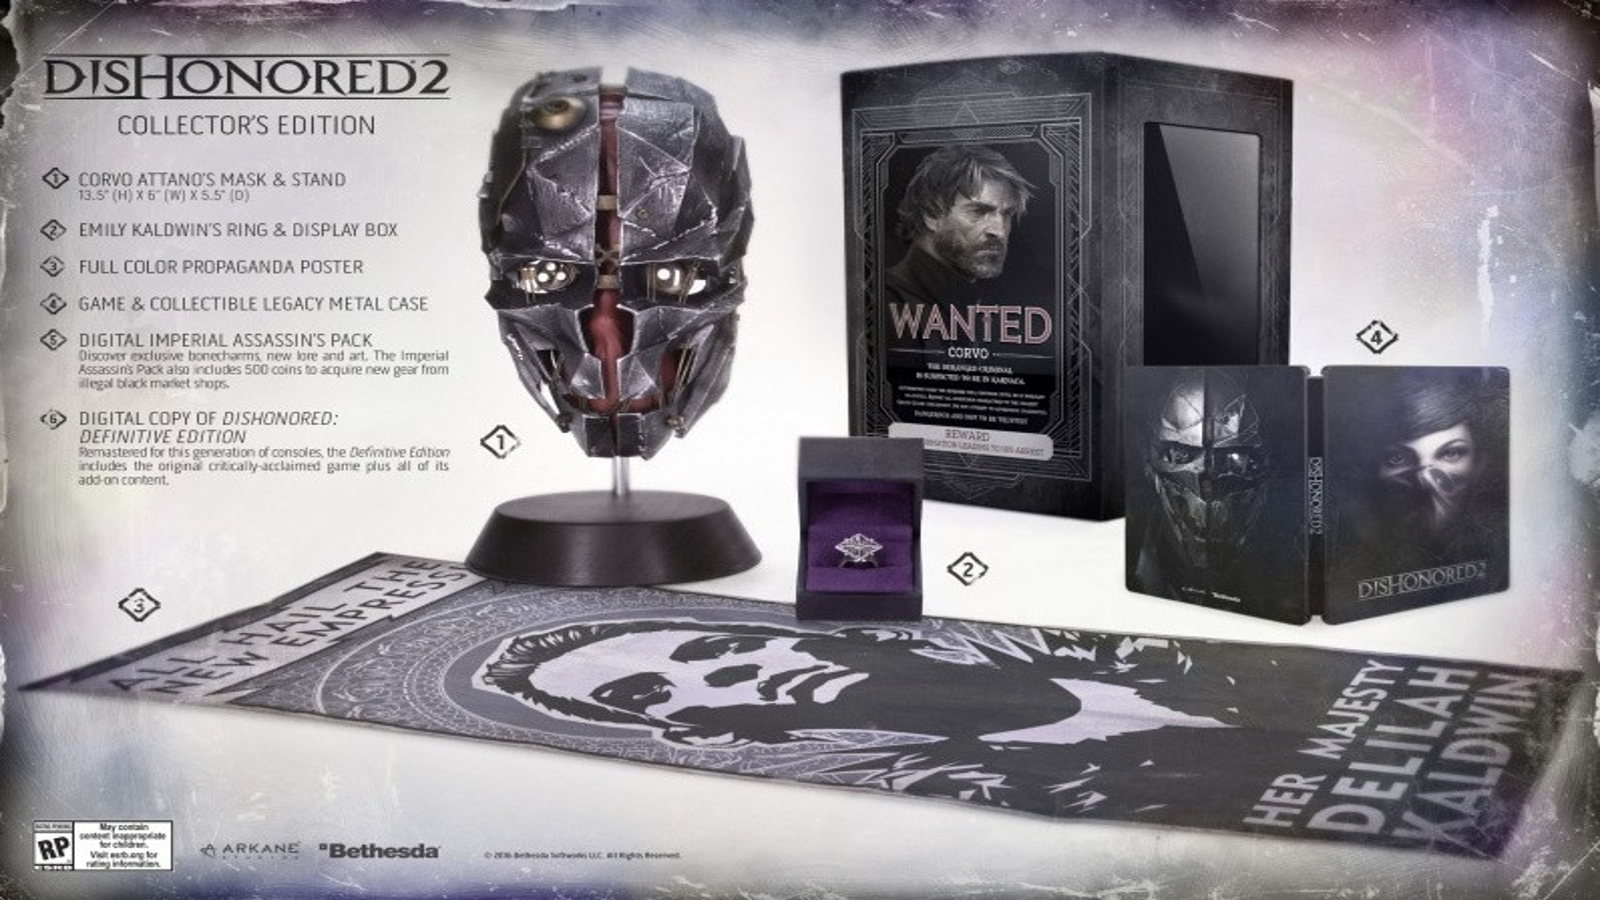 DISHONORED GAME OF THE YEAR DEFINITIVE EDITION PC ENVIO DIGITAL